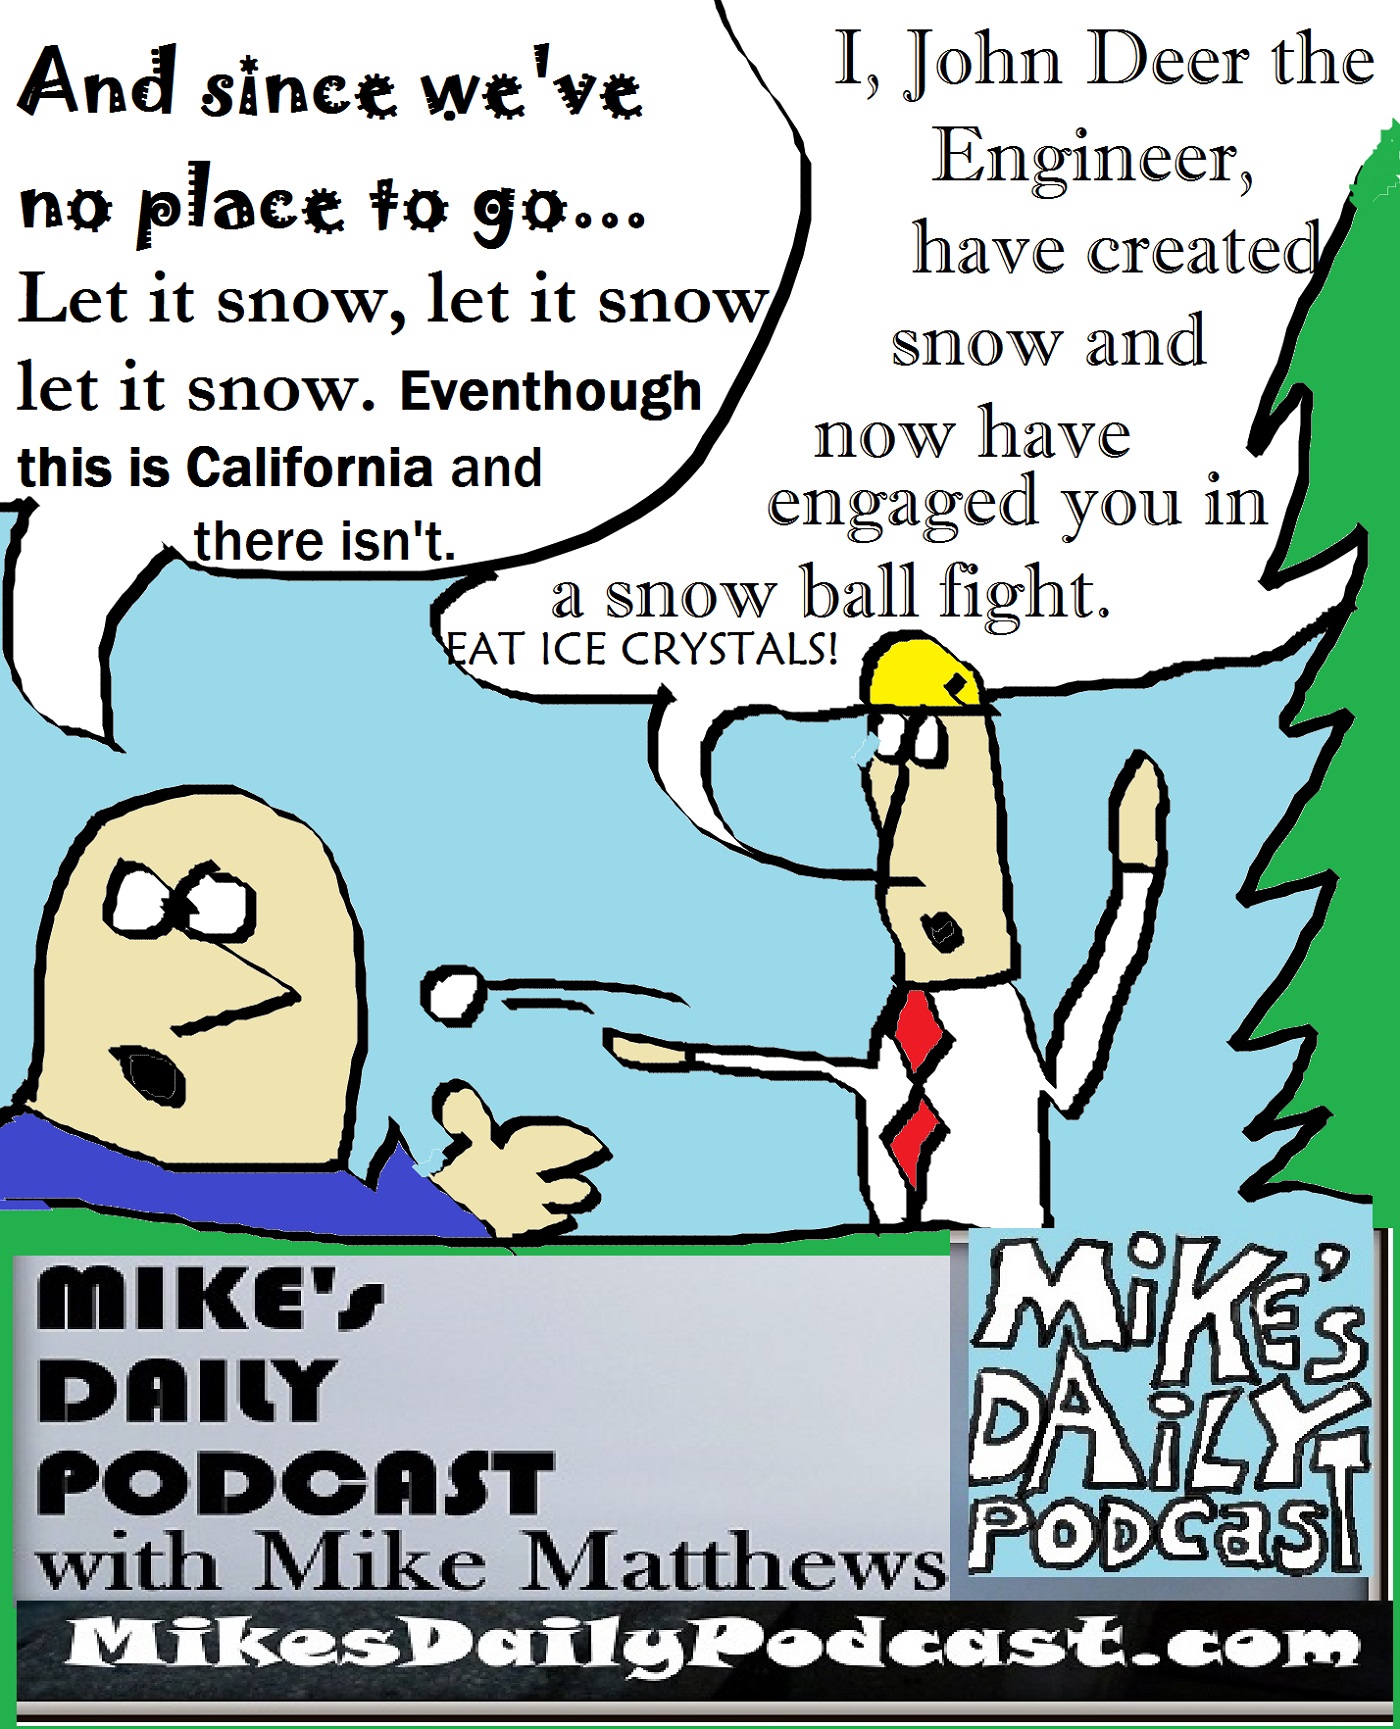 mikes-daily-podcast-1232-snow-fight-john-deer-the-engineer